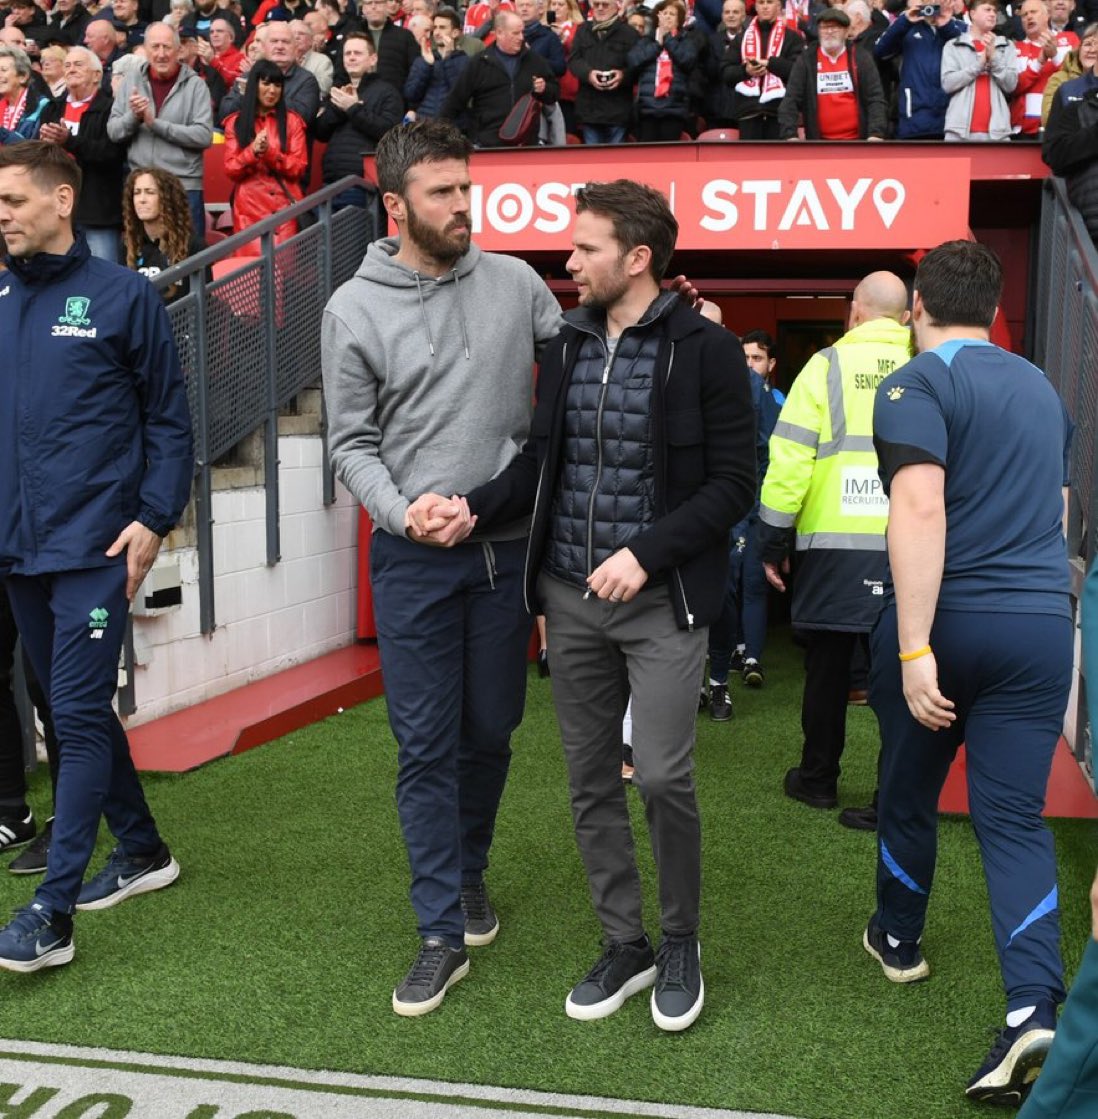 With Cleverly, Mark Robins, and Michael Carrick, United have a number of ex players who are now managers in the Championship division. I can see a clear pathway for youth players developing down there, I hope INEOS see it. It also depends on team styles of play too but Carrick>>